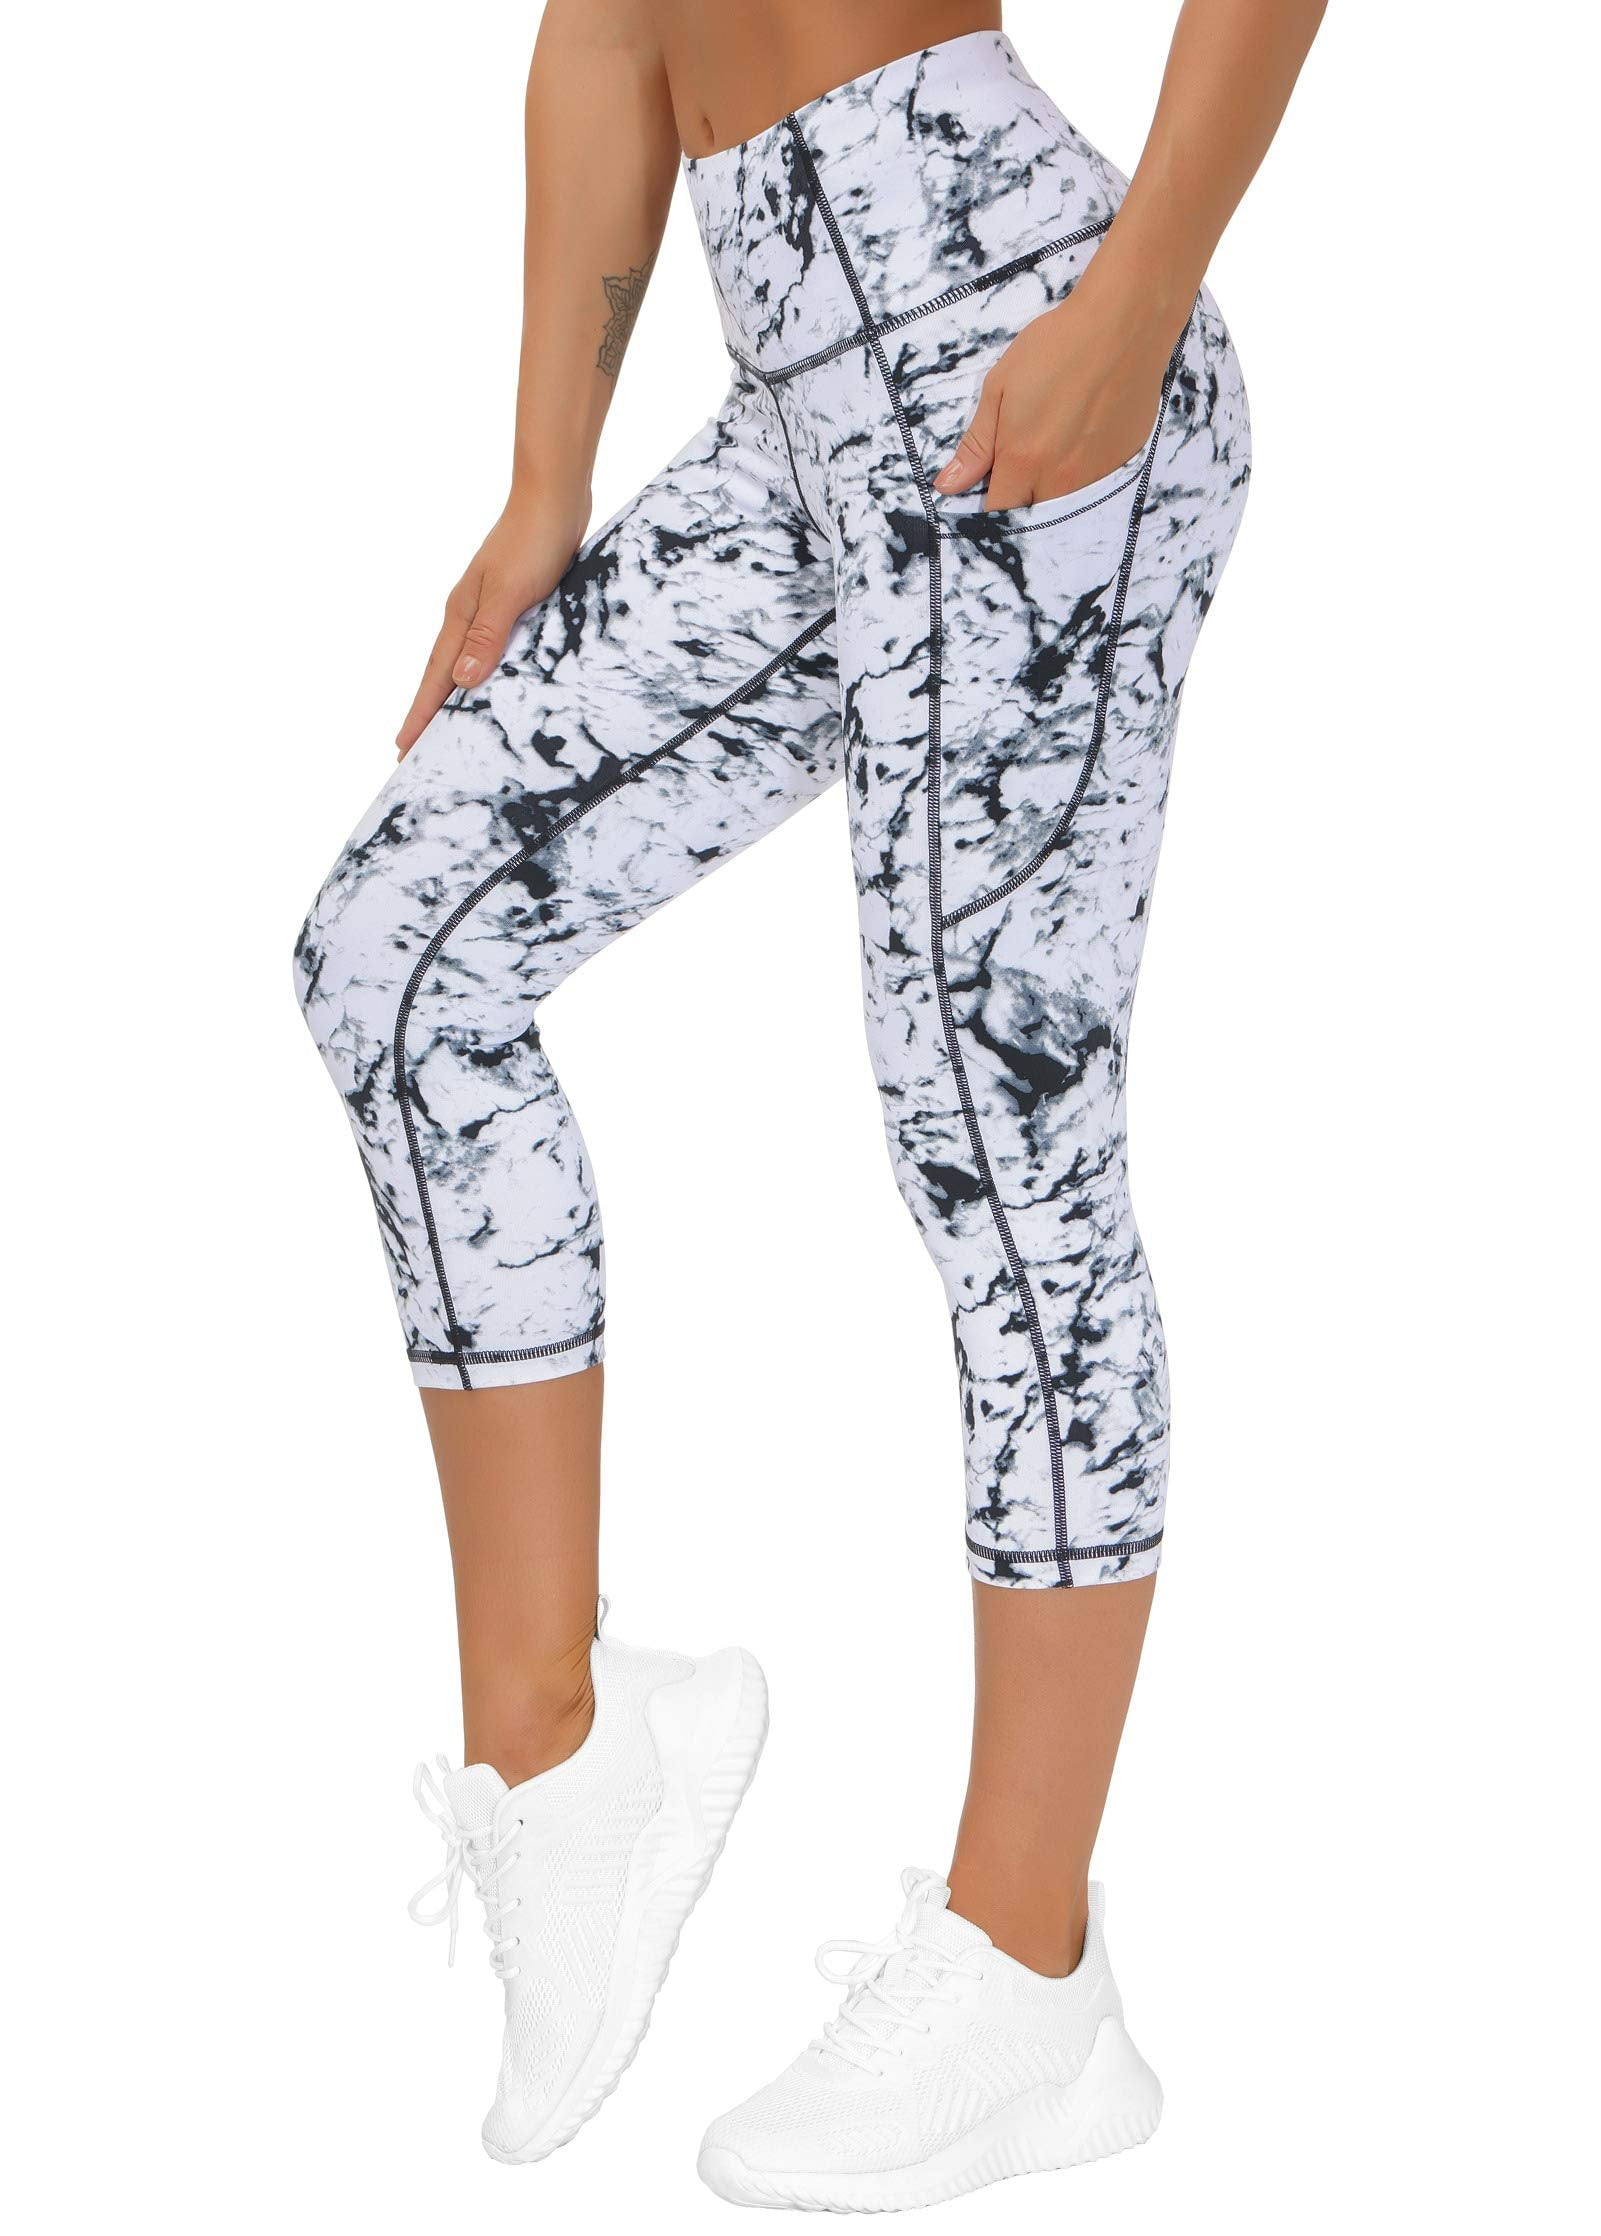 THE GYM PEOPLE Thick High Waist Yoga Pants with Pockets, Tummy Control  Workout Running Yoga Leggings for Women (Small, Z- Capris Marble) 